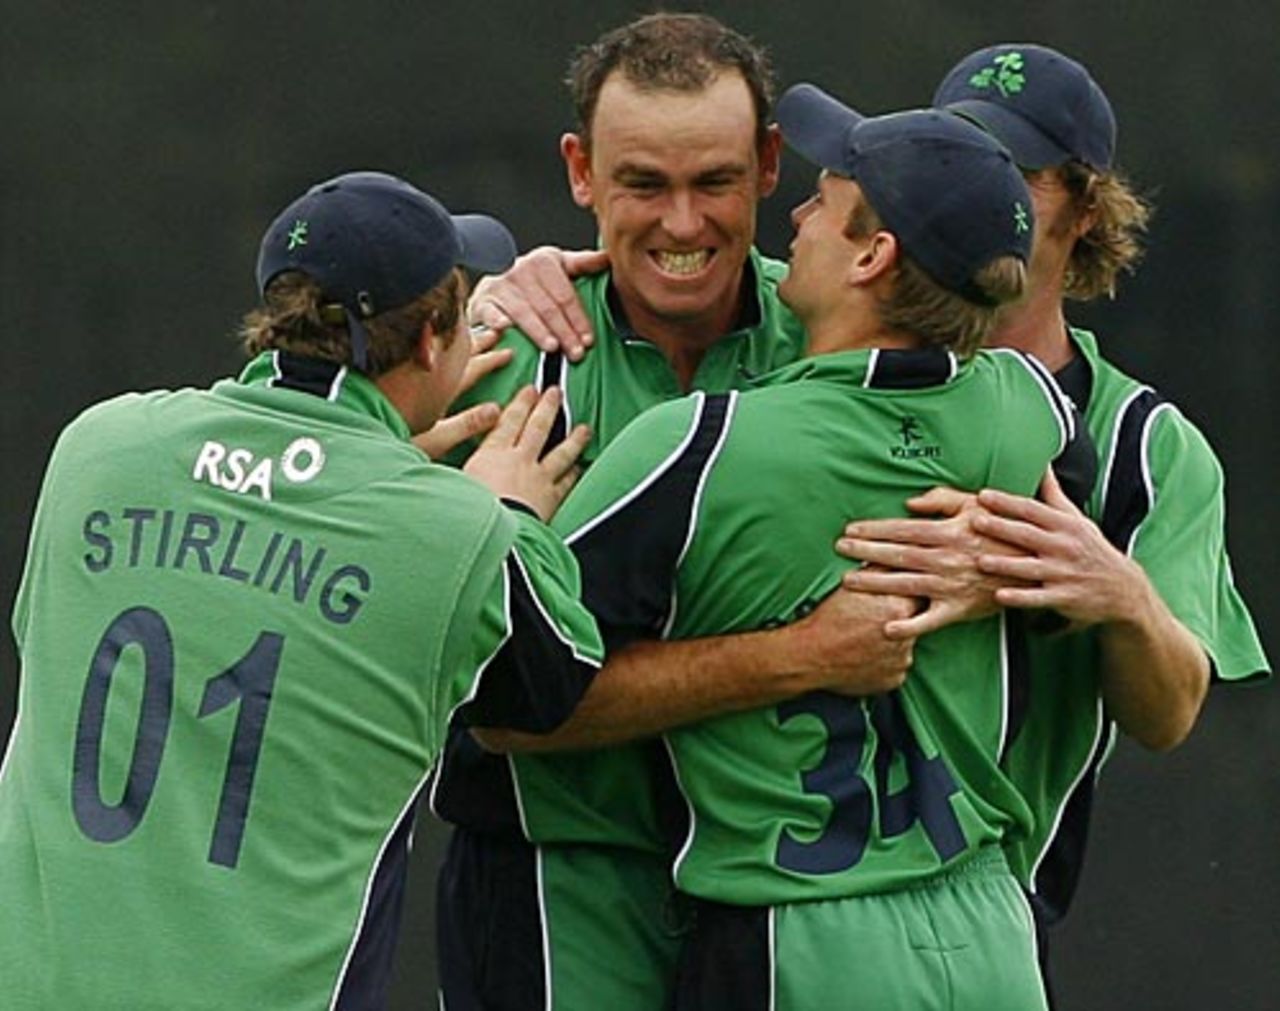 Trent Johnston struck two early blows, Ireland v England, only ODI, Stormont, August 27, 2009